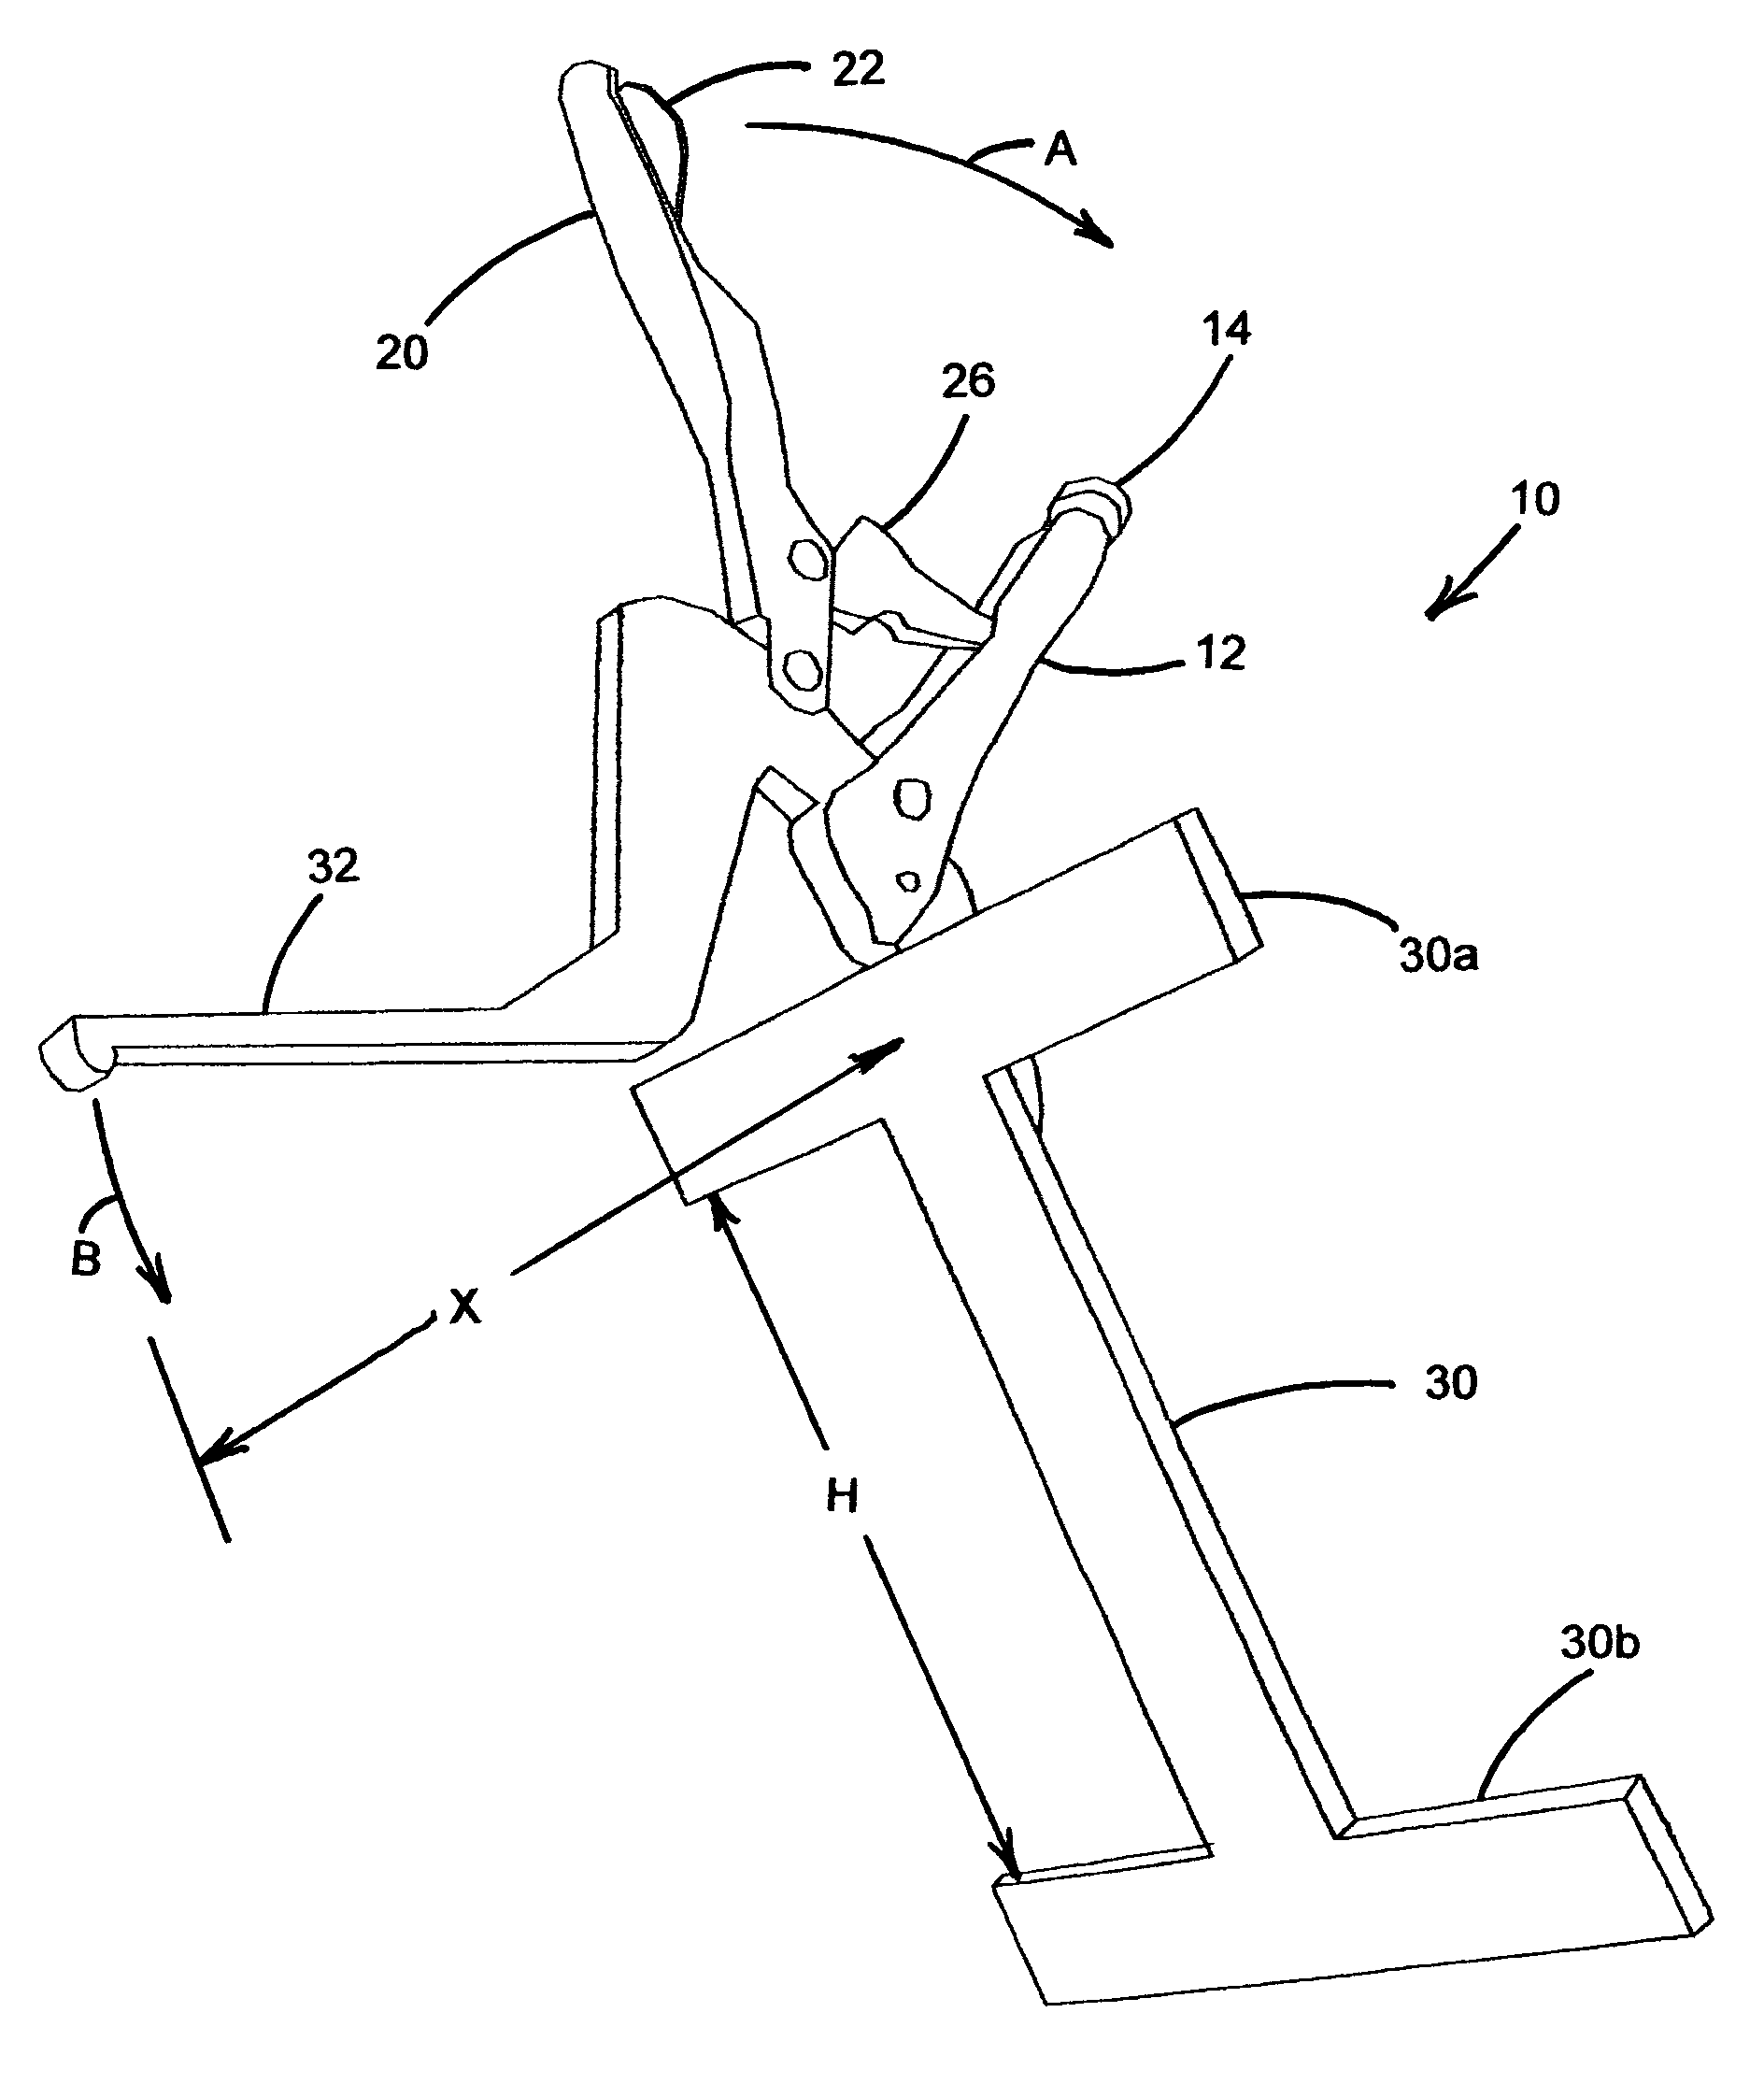 Offset force clamp